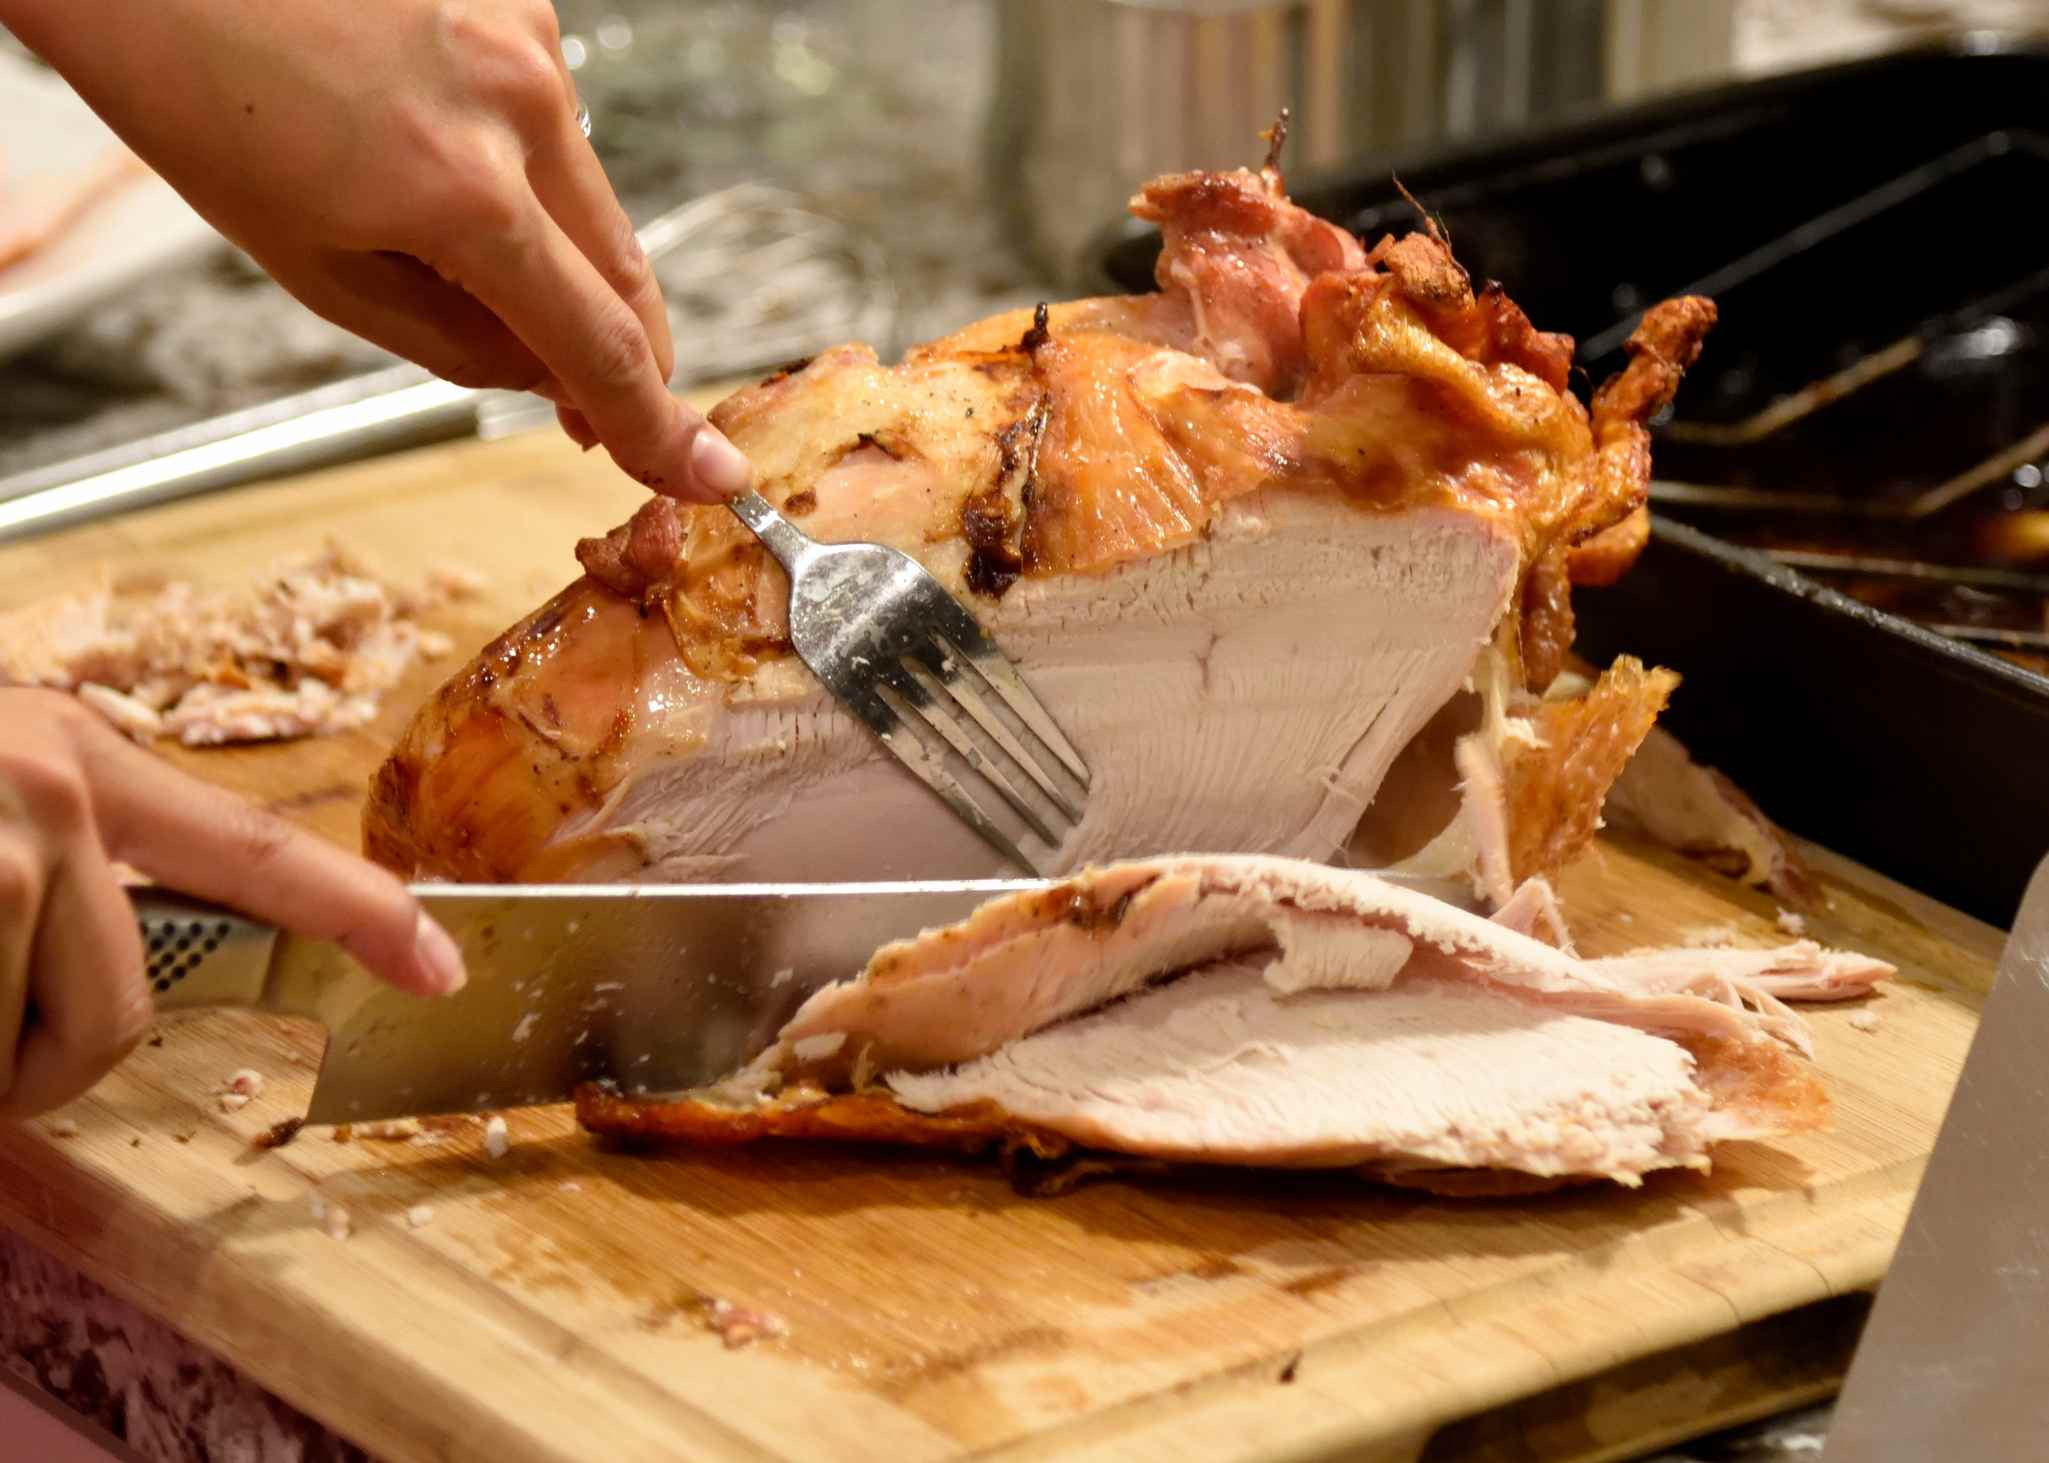 Order Cooked Turkey For Thanksgiving
 The 10 Best Mail Order Turkeys of 2019